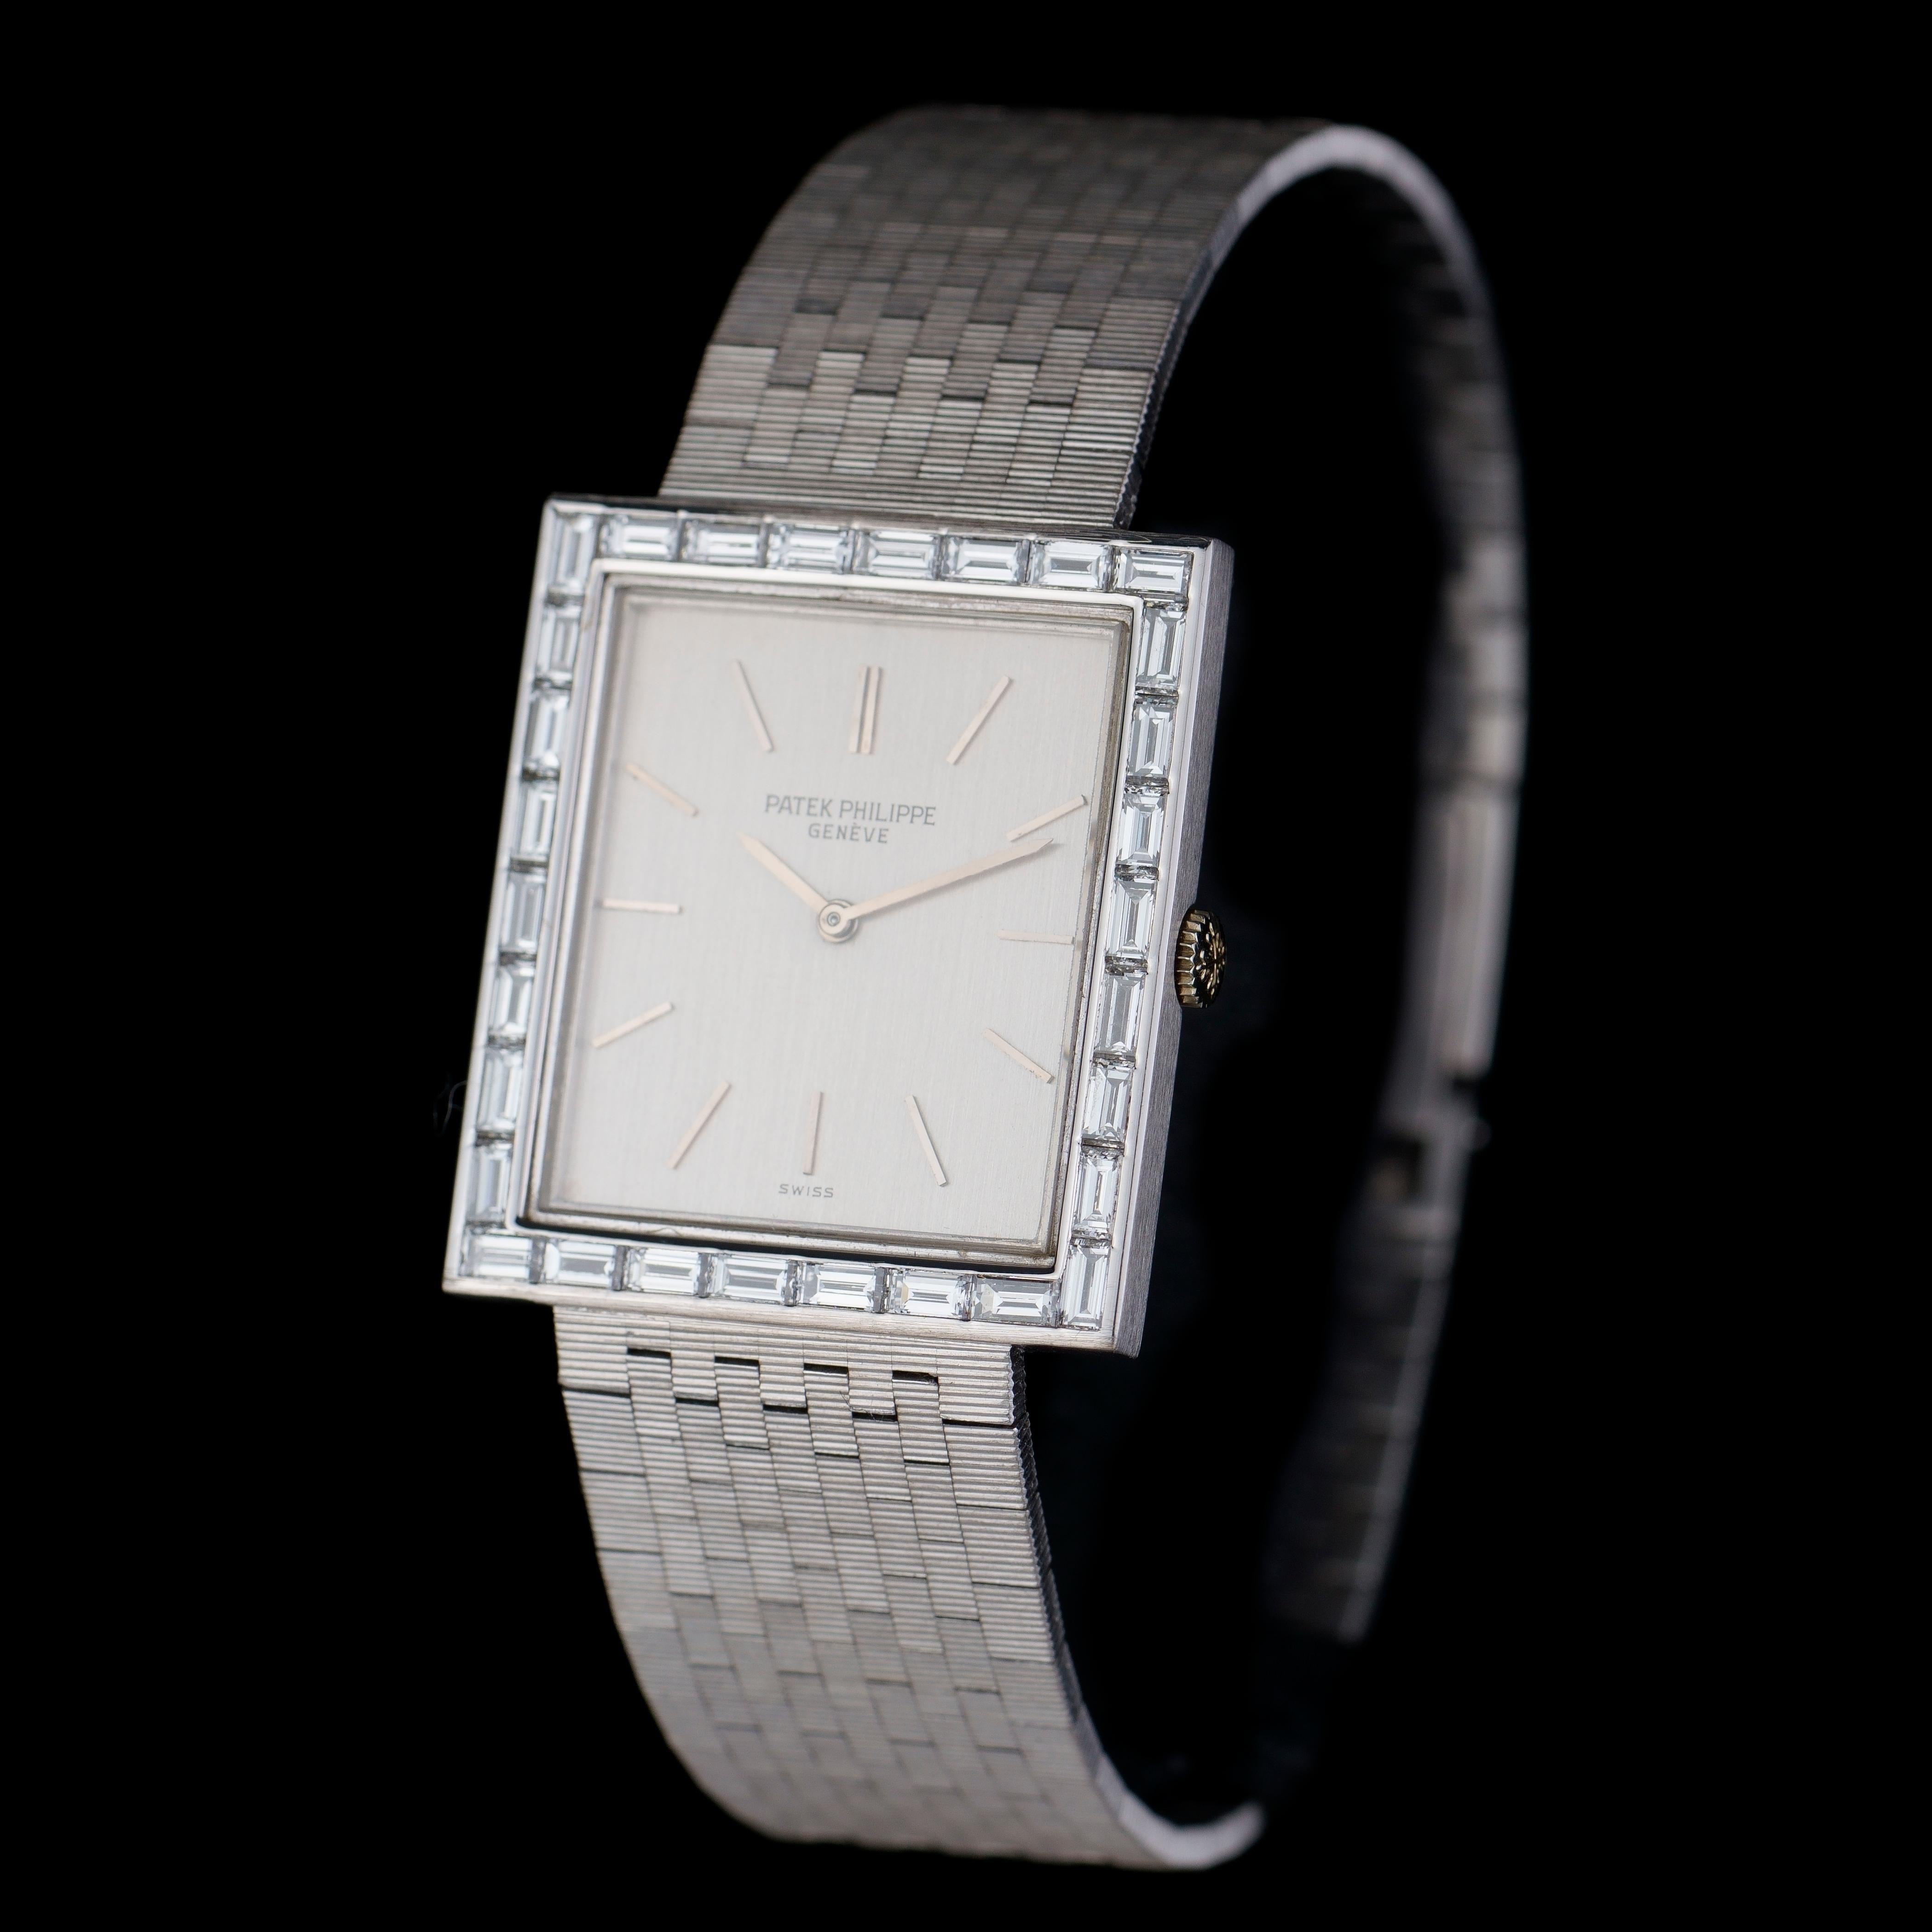 Patek Philippe Ref. 3540/2 full 18kt white gold ladies wristwatch with baguette diamonds on the bezel.
Ref. 3540/2

Video available.

Made in 1980’s
Movement: Manual Winding
Bracelet Length: 18 cm
Glass: Sapphire Crystal

Diamonds -
Cut: